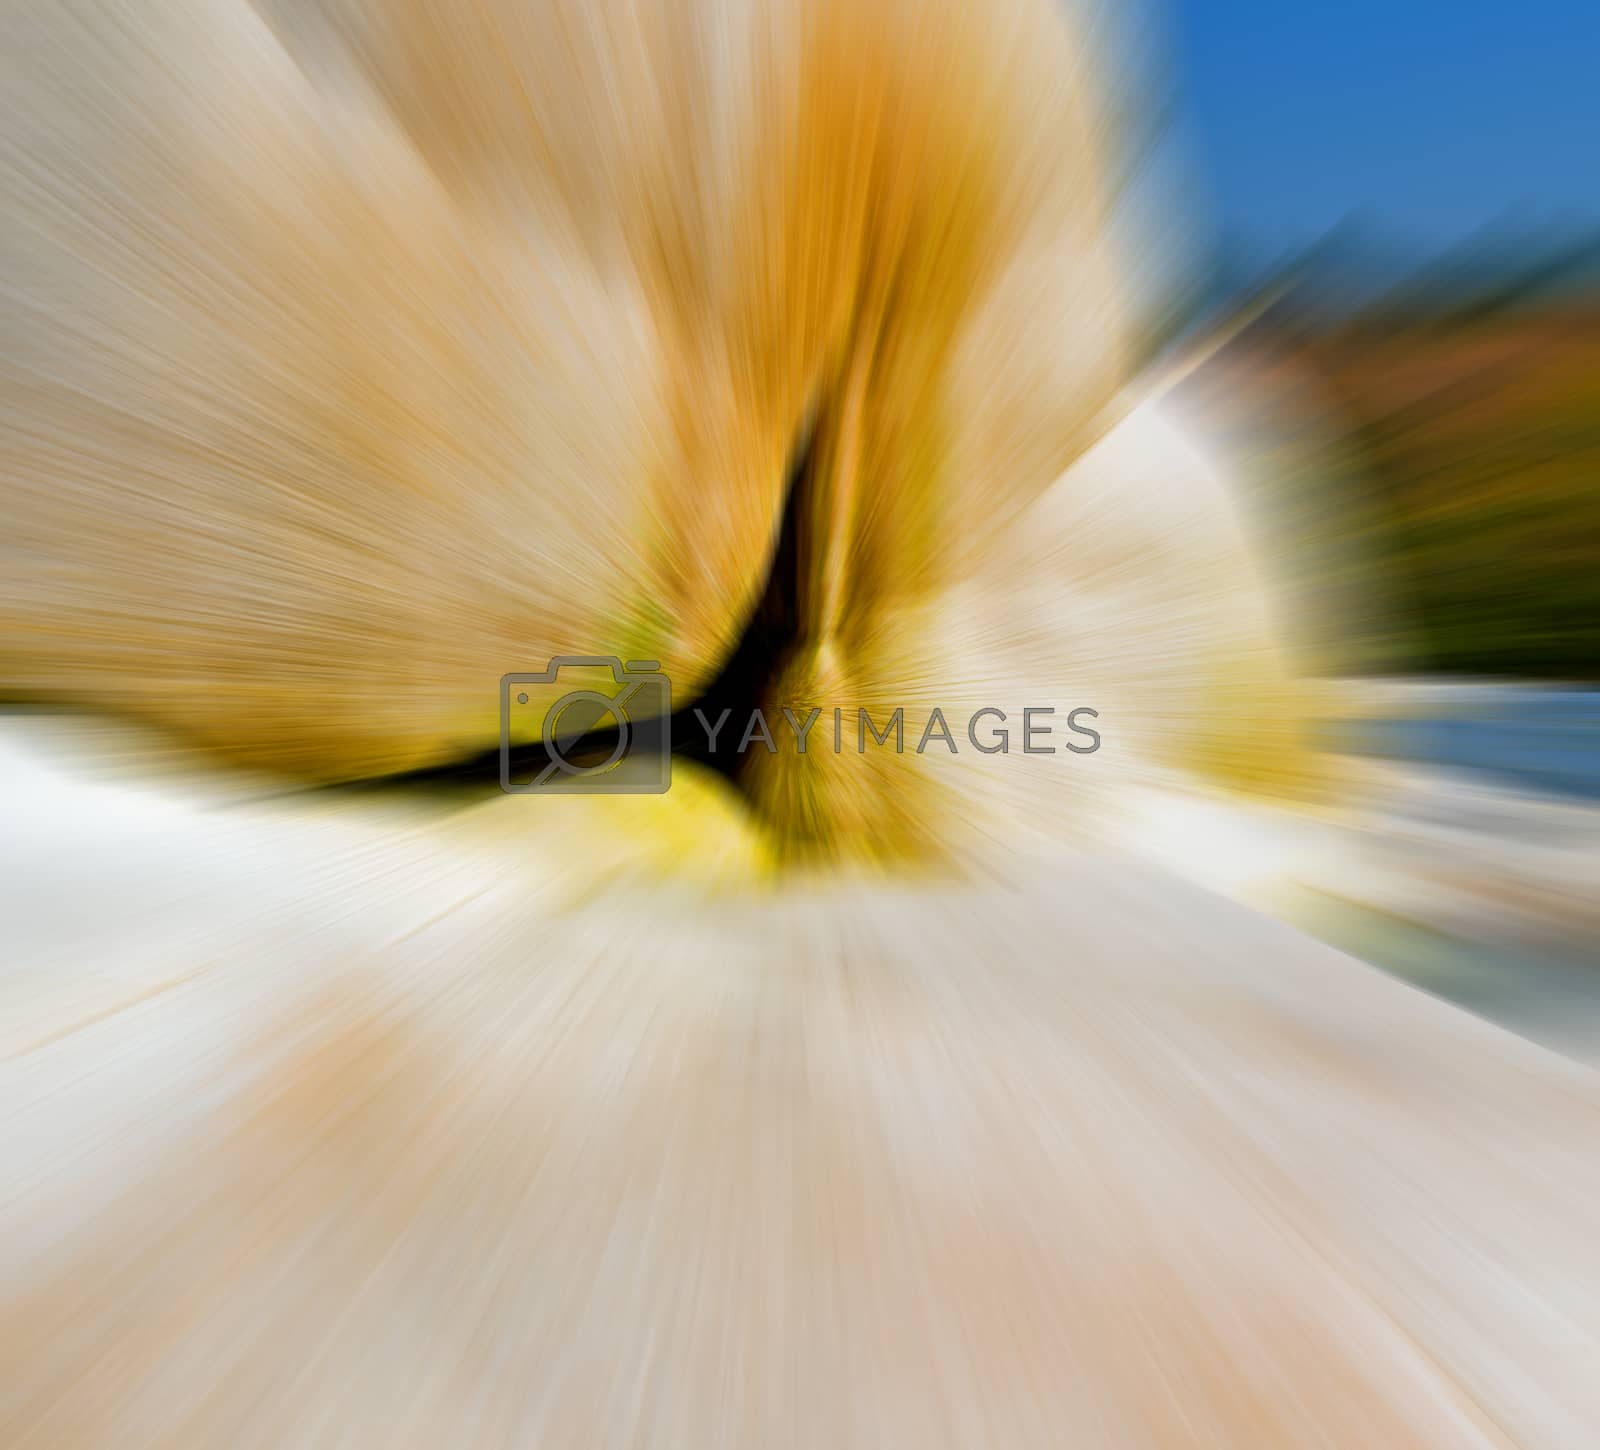 Royalty free image of calcium bath and travertine unique blurred  by lkpro